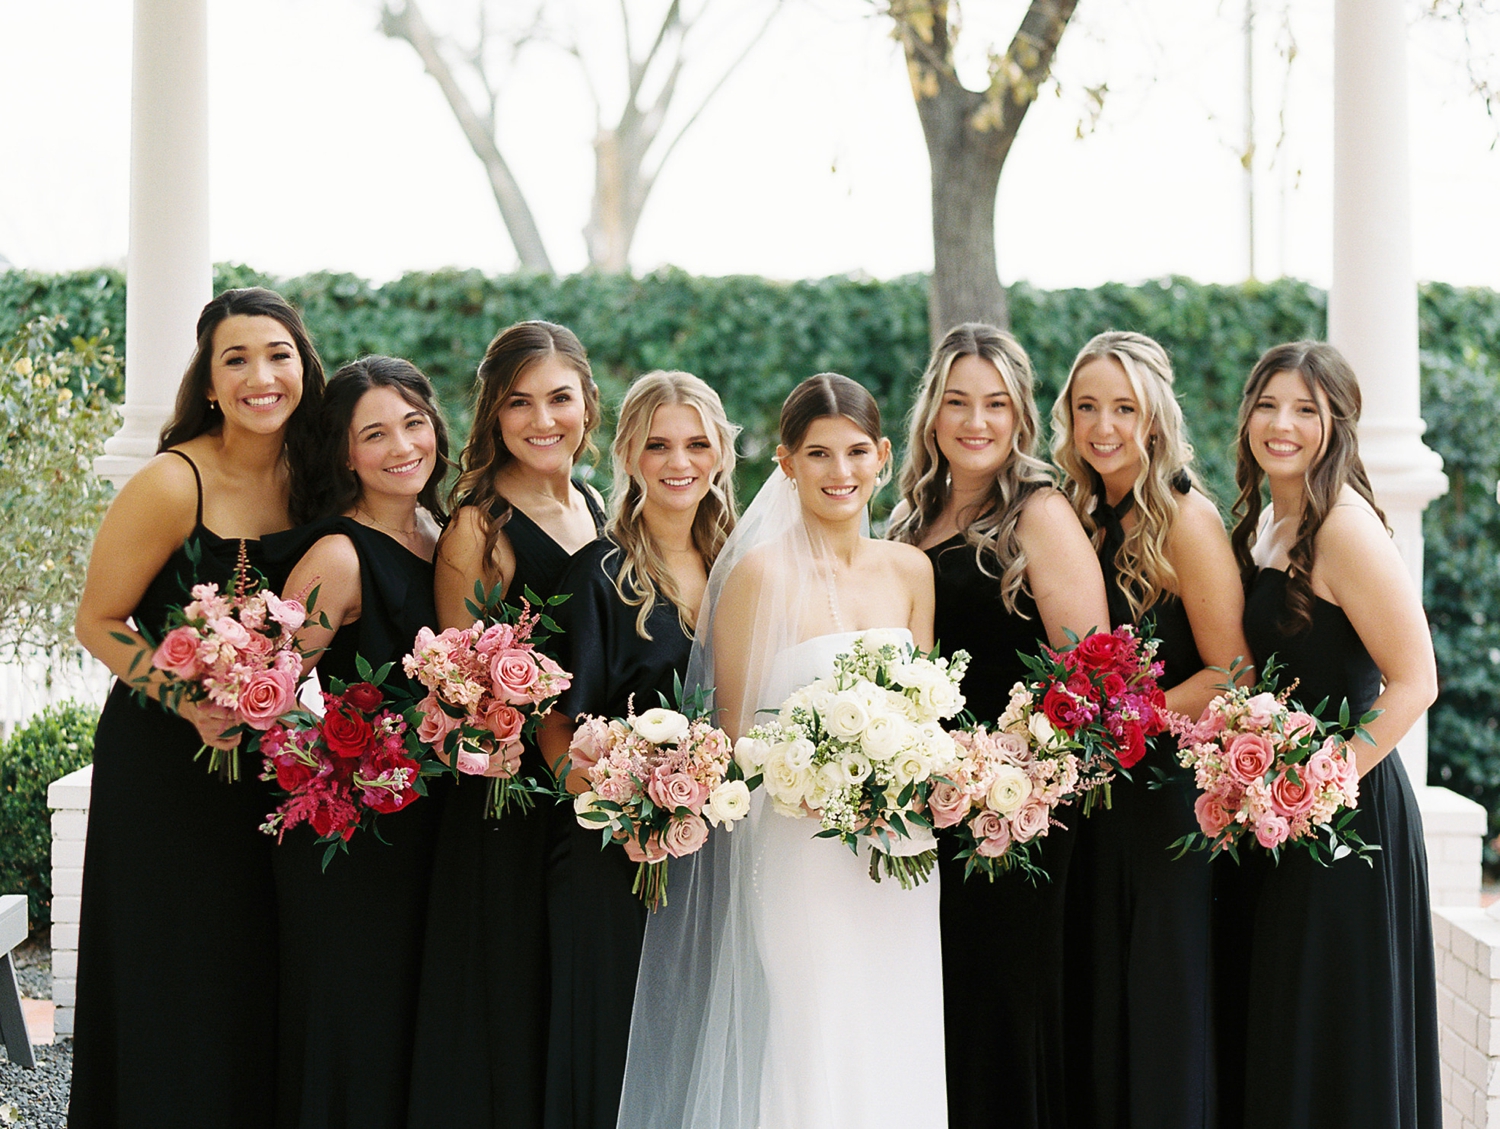 What to expect when budgeting for wedding florals. | Austin Wedding Floral Designer | Reiley + Rose